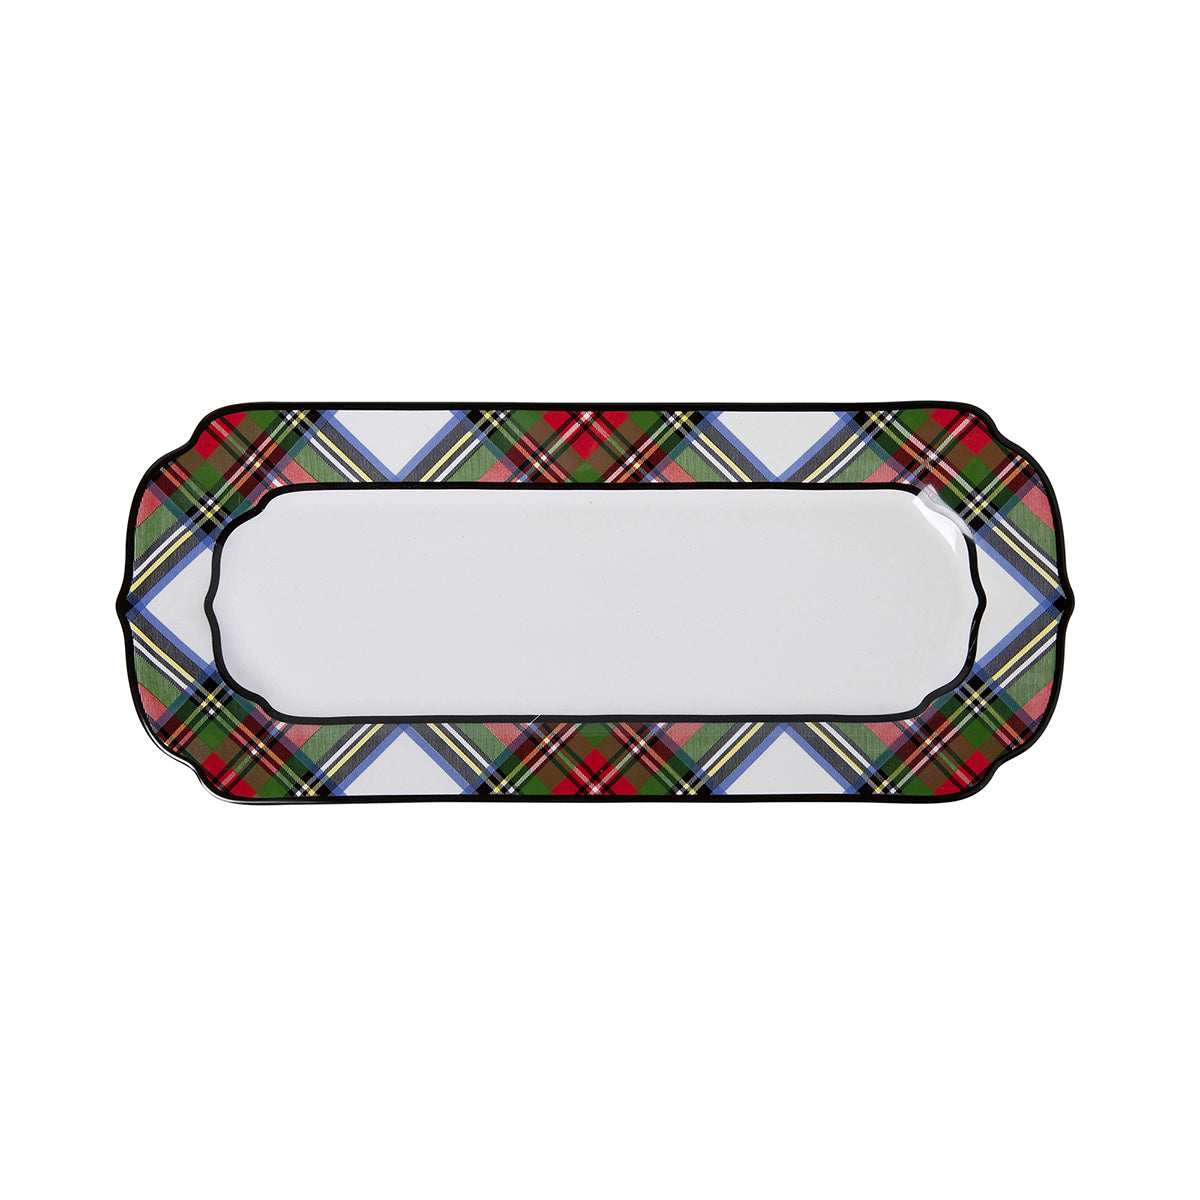 This dapper tray is part of Juliska's new Stewart Tartan dinnerware collection from plumpuddingkitchen.com, crafted by artisans in Portugal. Enjoy styling the rich and colorful tartan motifs with other classic patterns for an elevated festive look. This classic serveware piece equally hosts savory noshes as well as desserts.